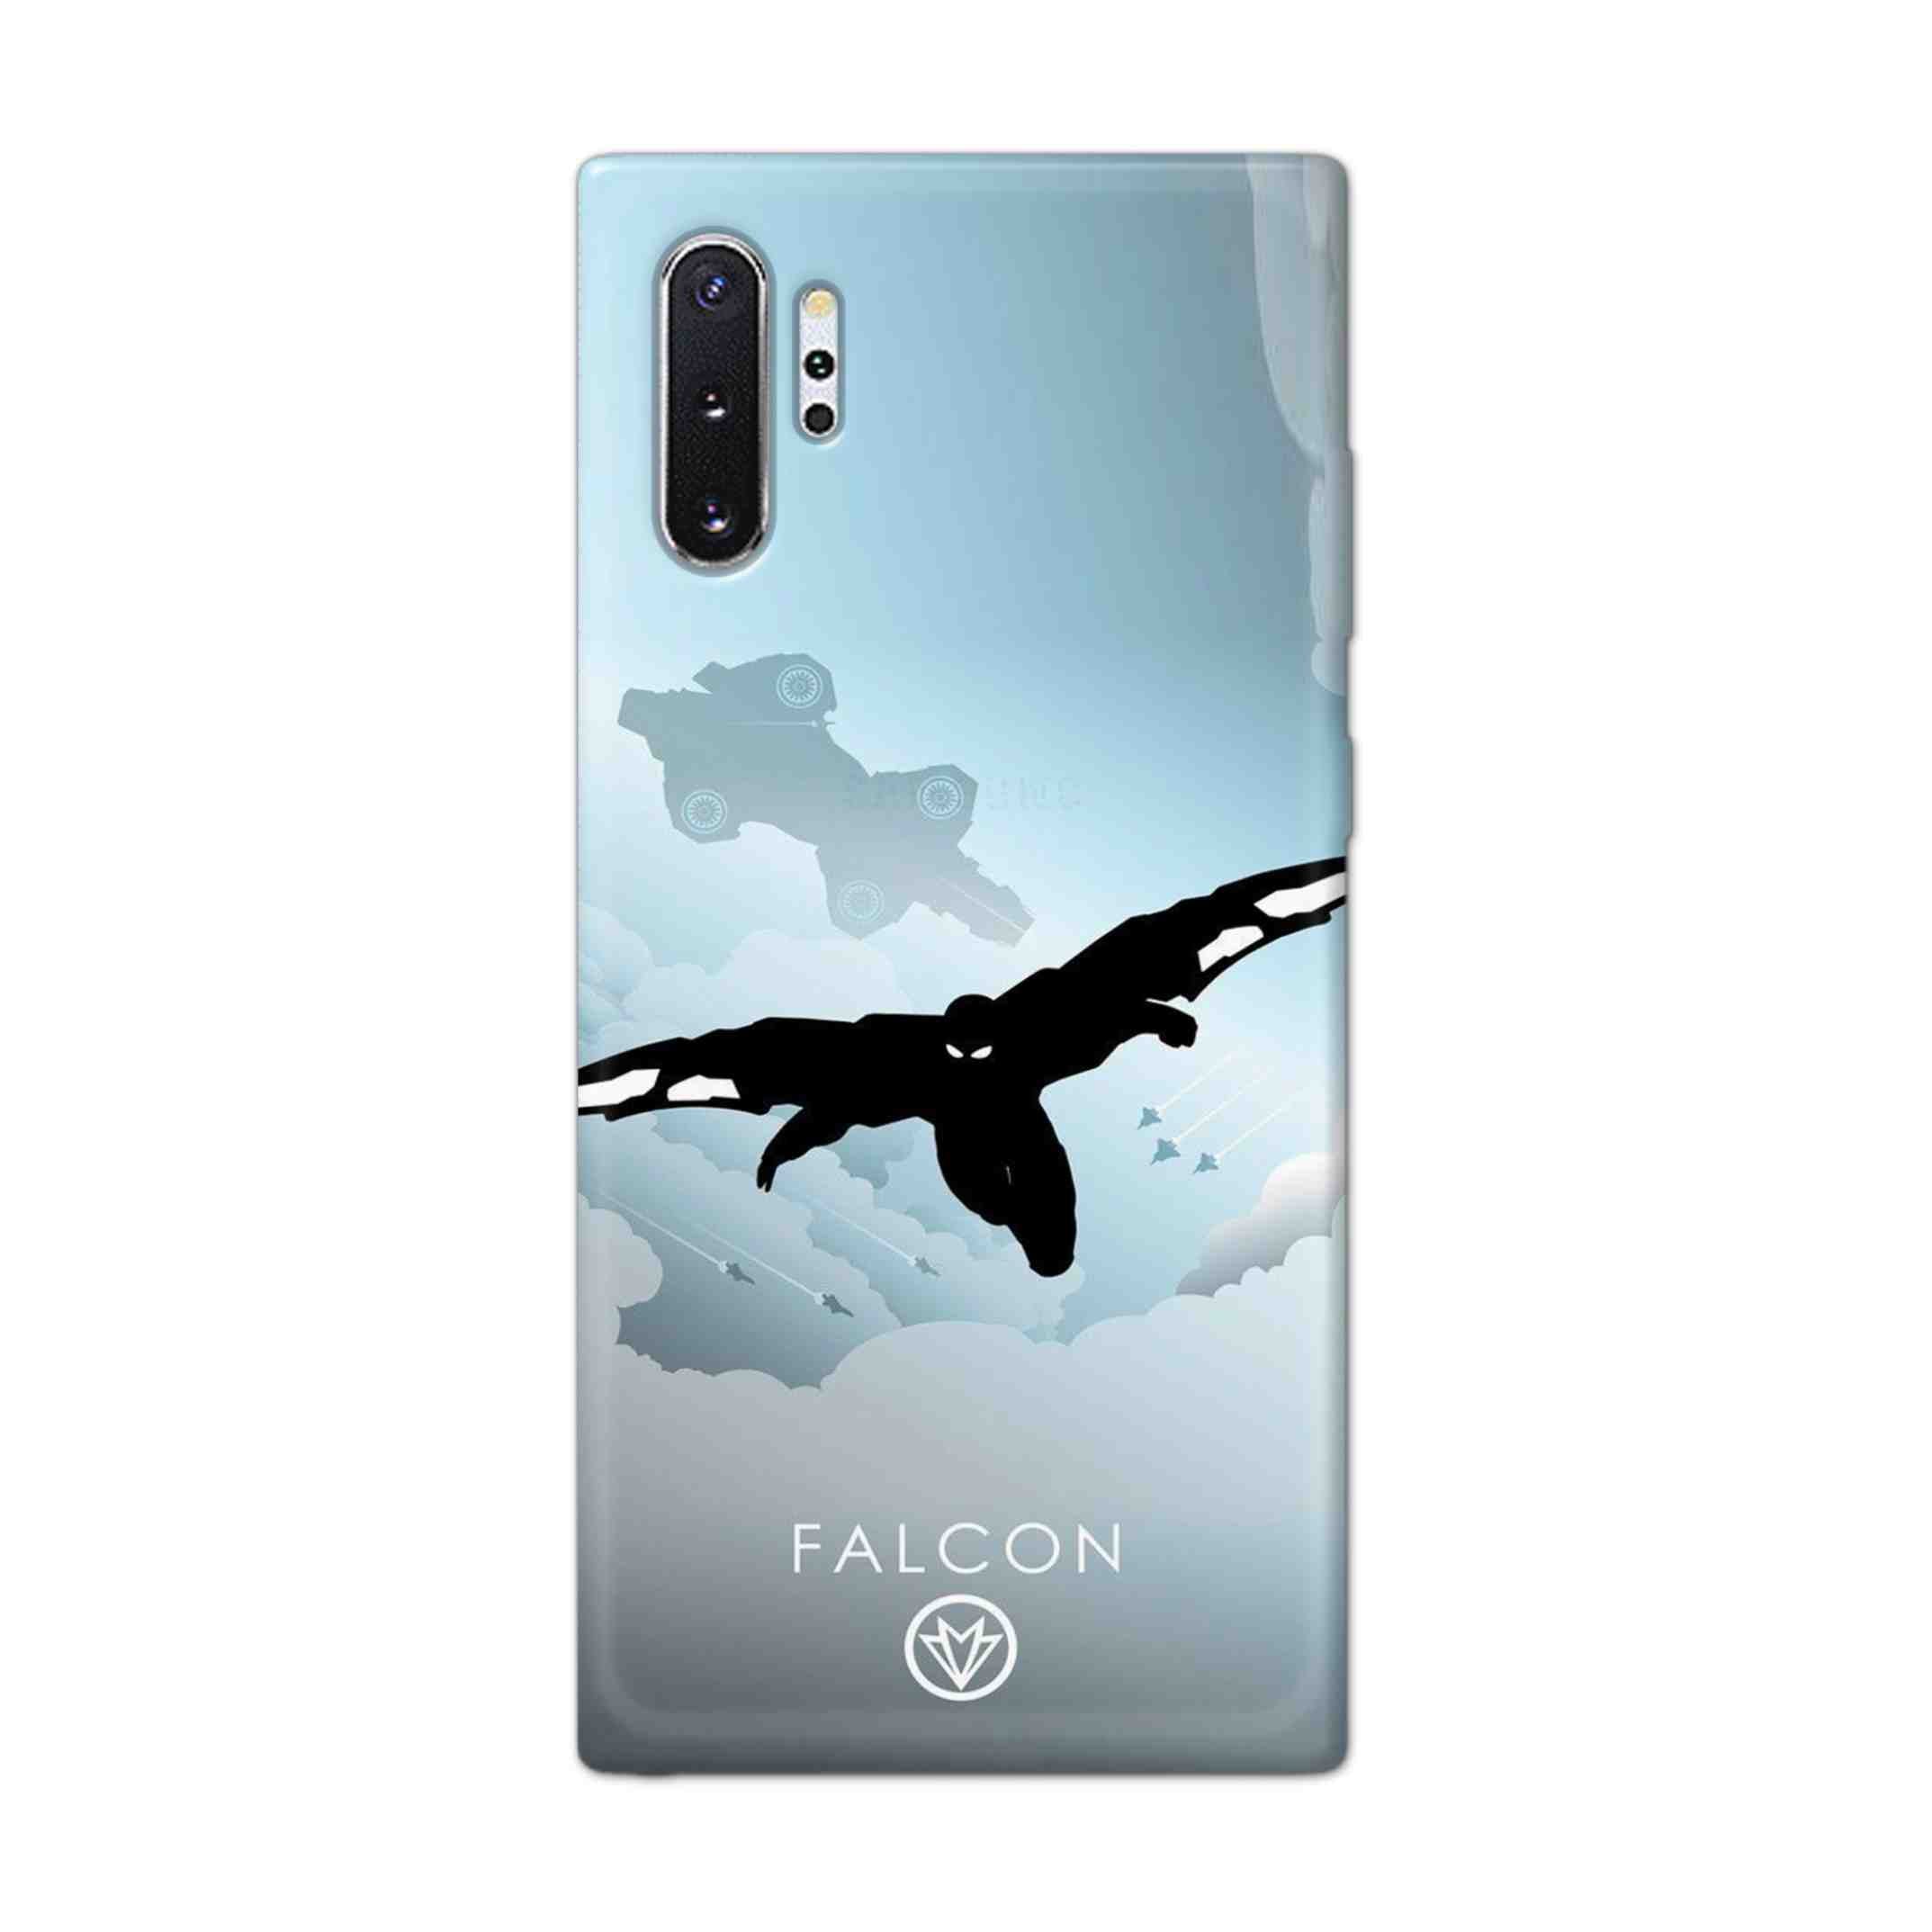 Buy Falcon Hard Back Mobile Phone Case Cover For Samsung Note 10 Plus (5G) Online